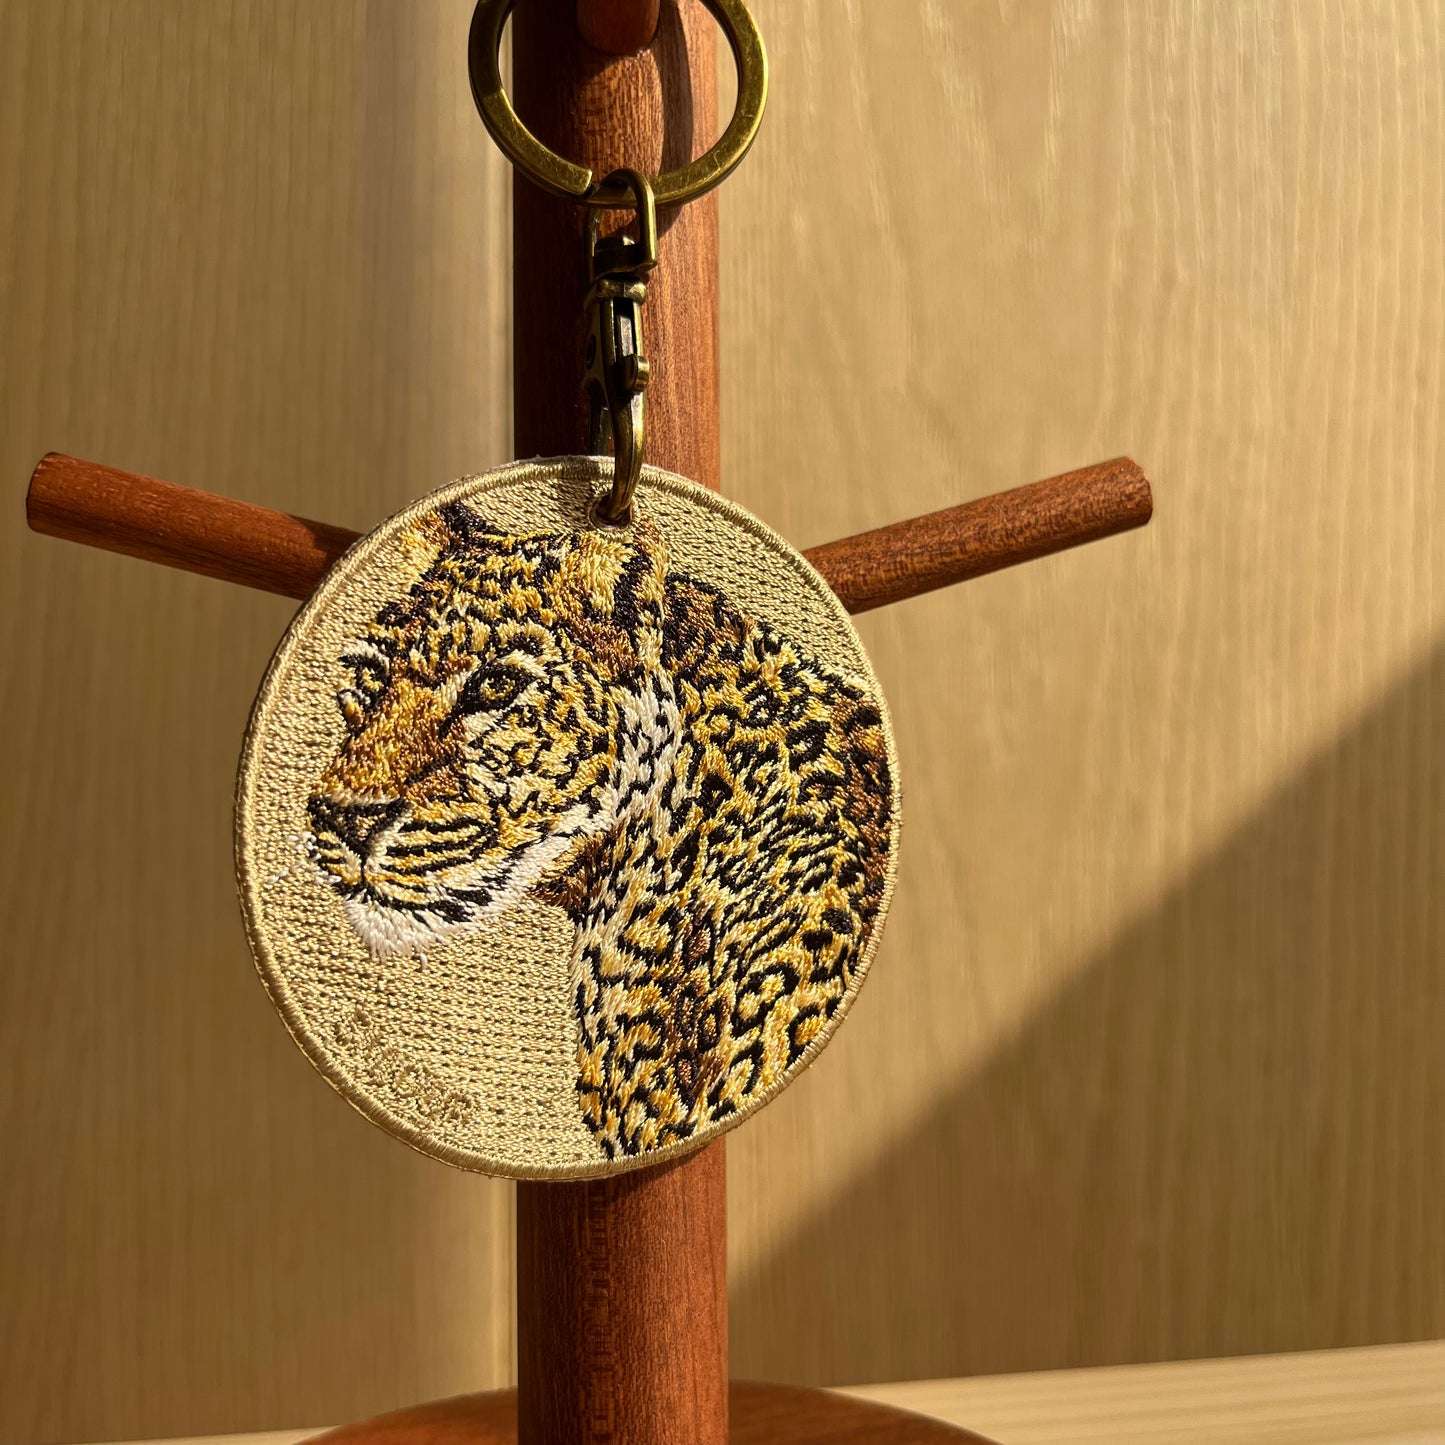 Reversible Embroidered Charm - Leopard